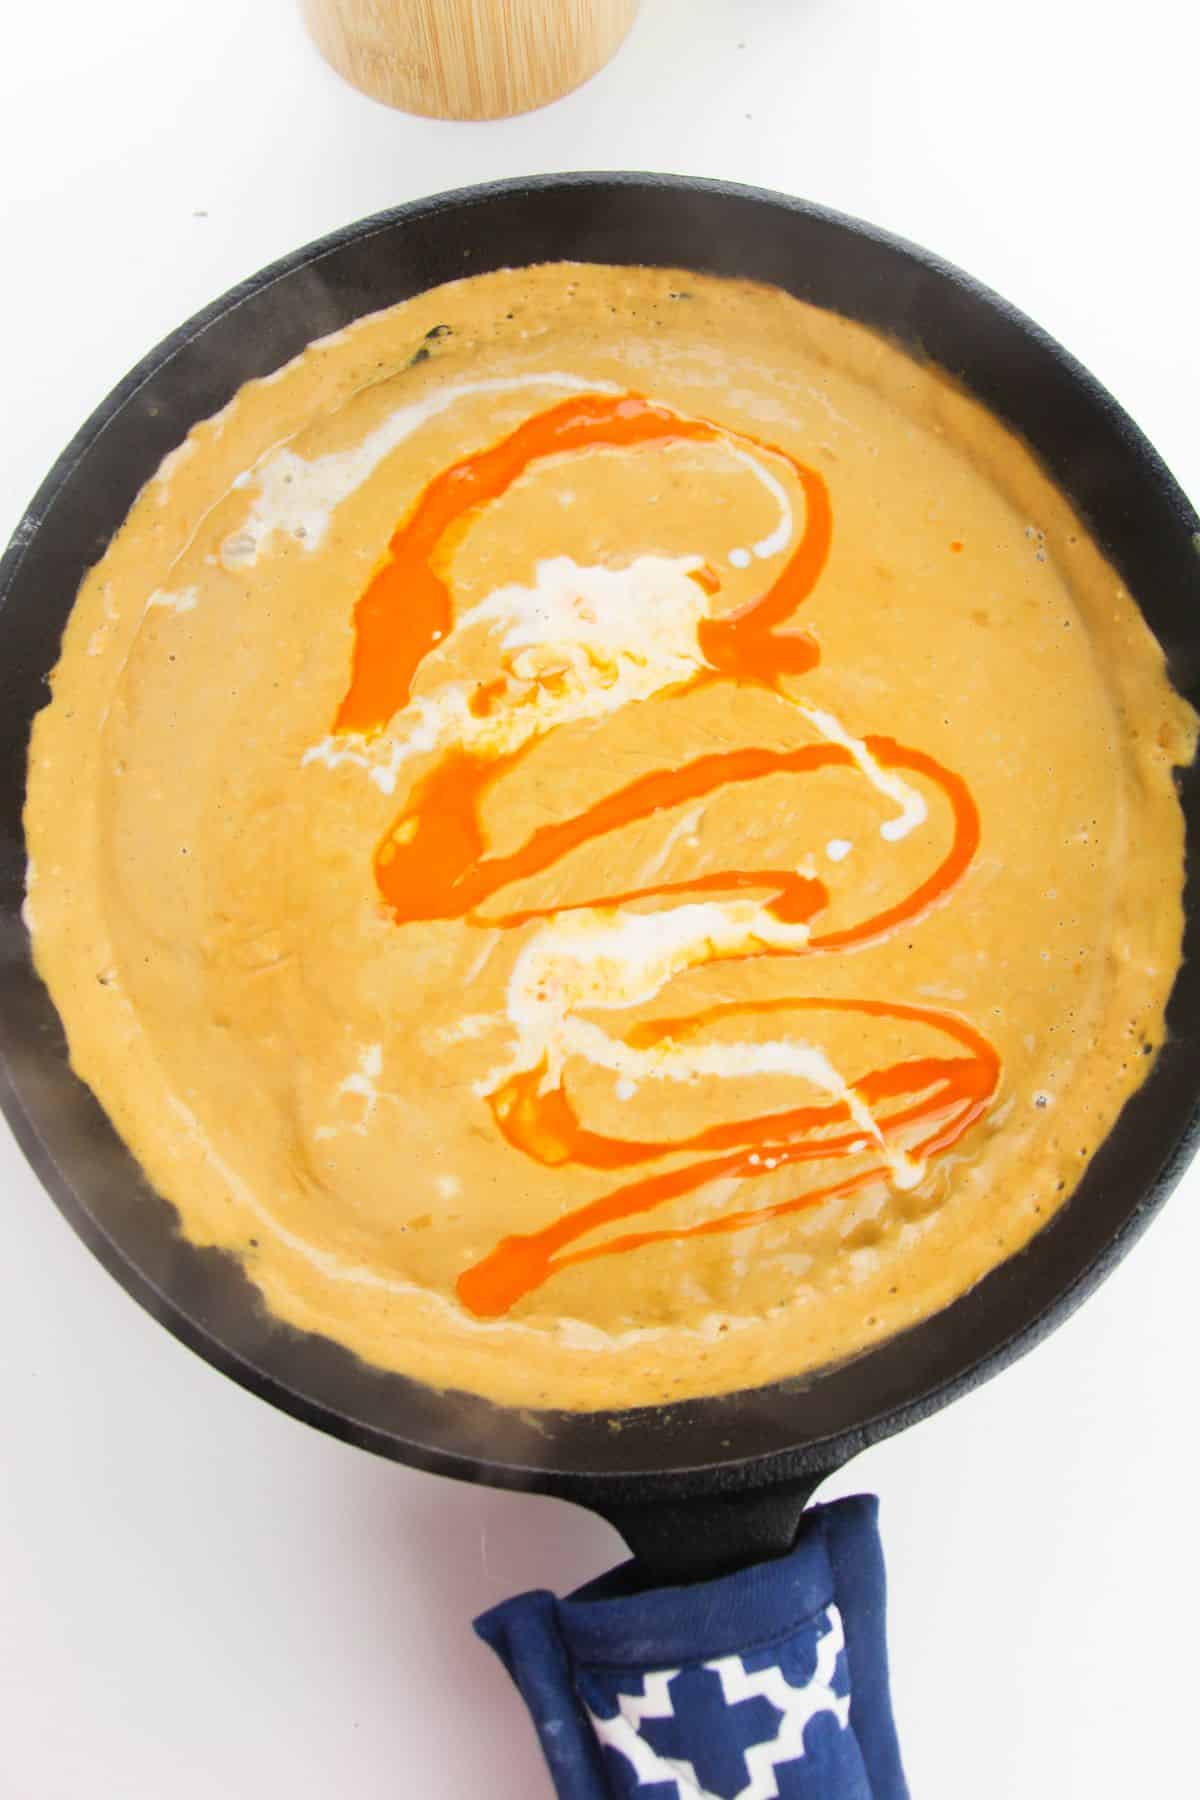 Buffalo sauce and milk are added to the  mixture in the skillet.